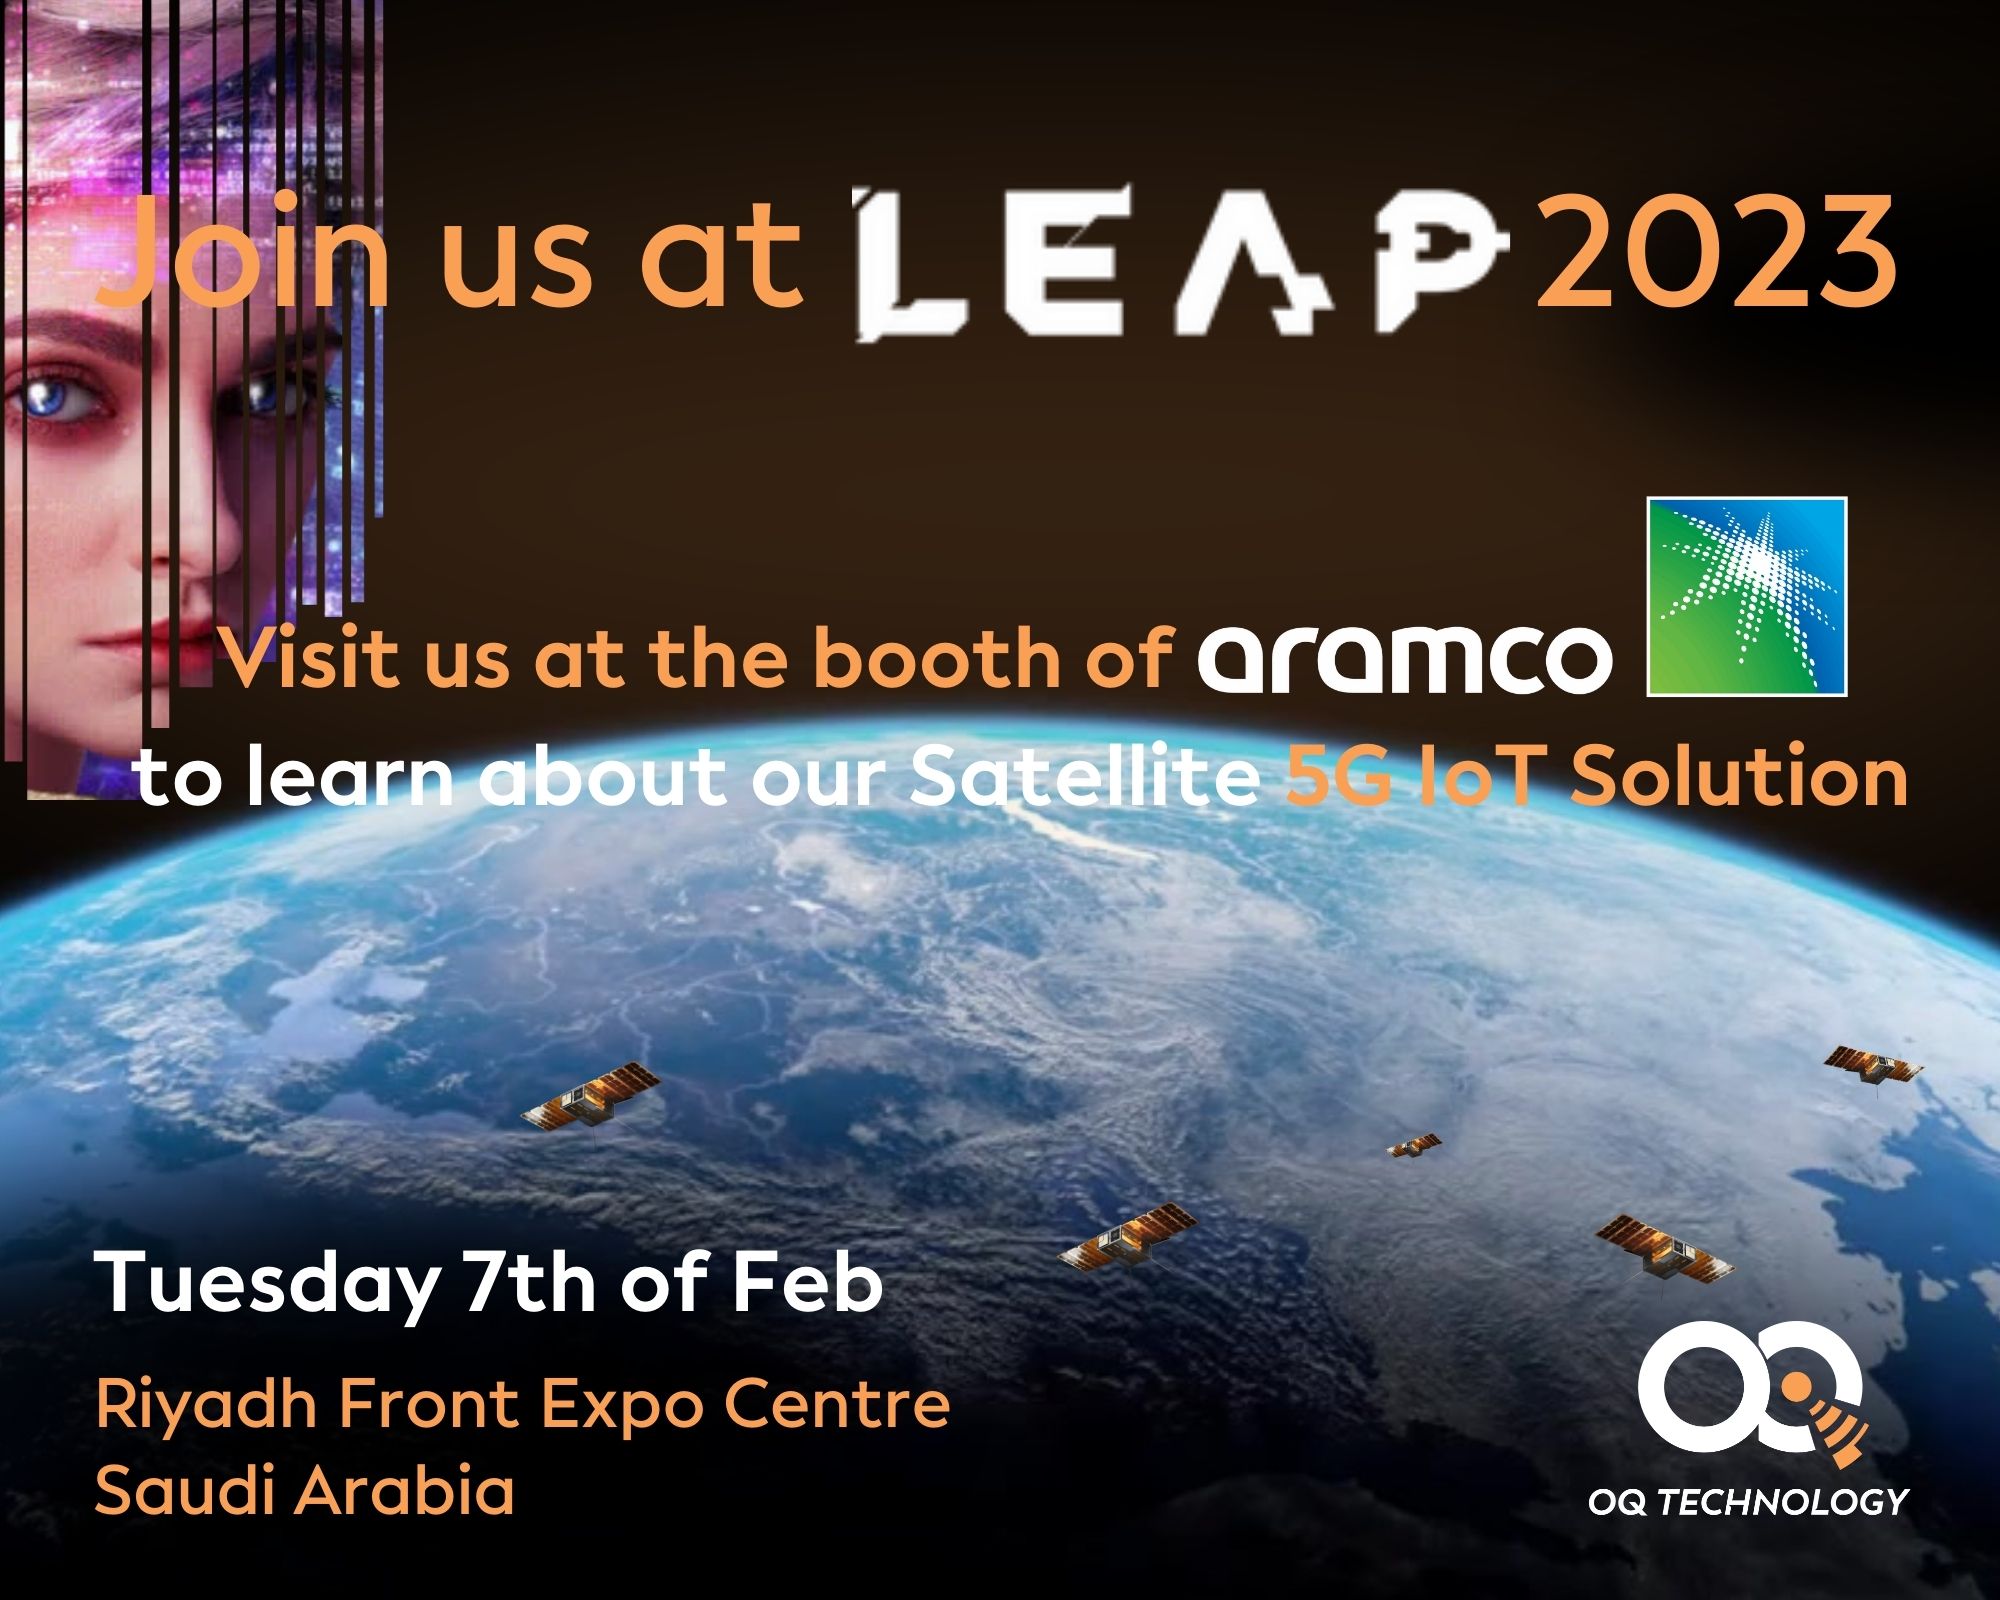 OQ Technology · LEAP23 event participation with 2 speeches from our CEO!